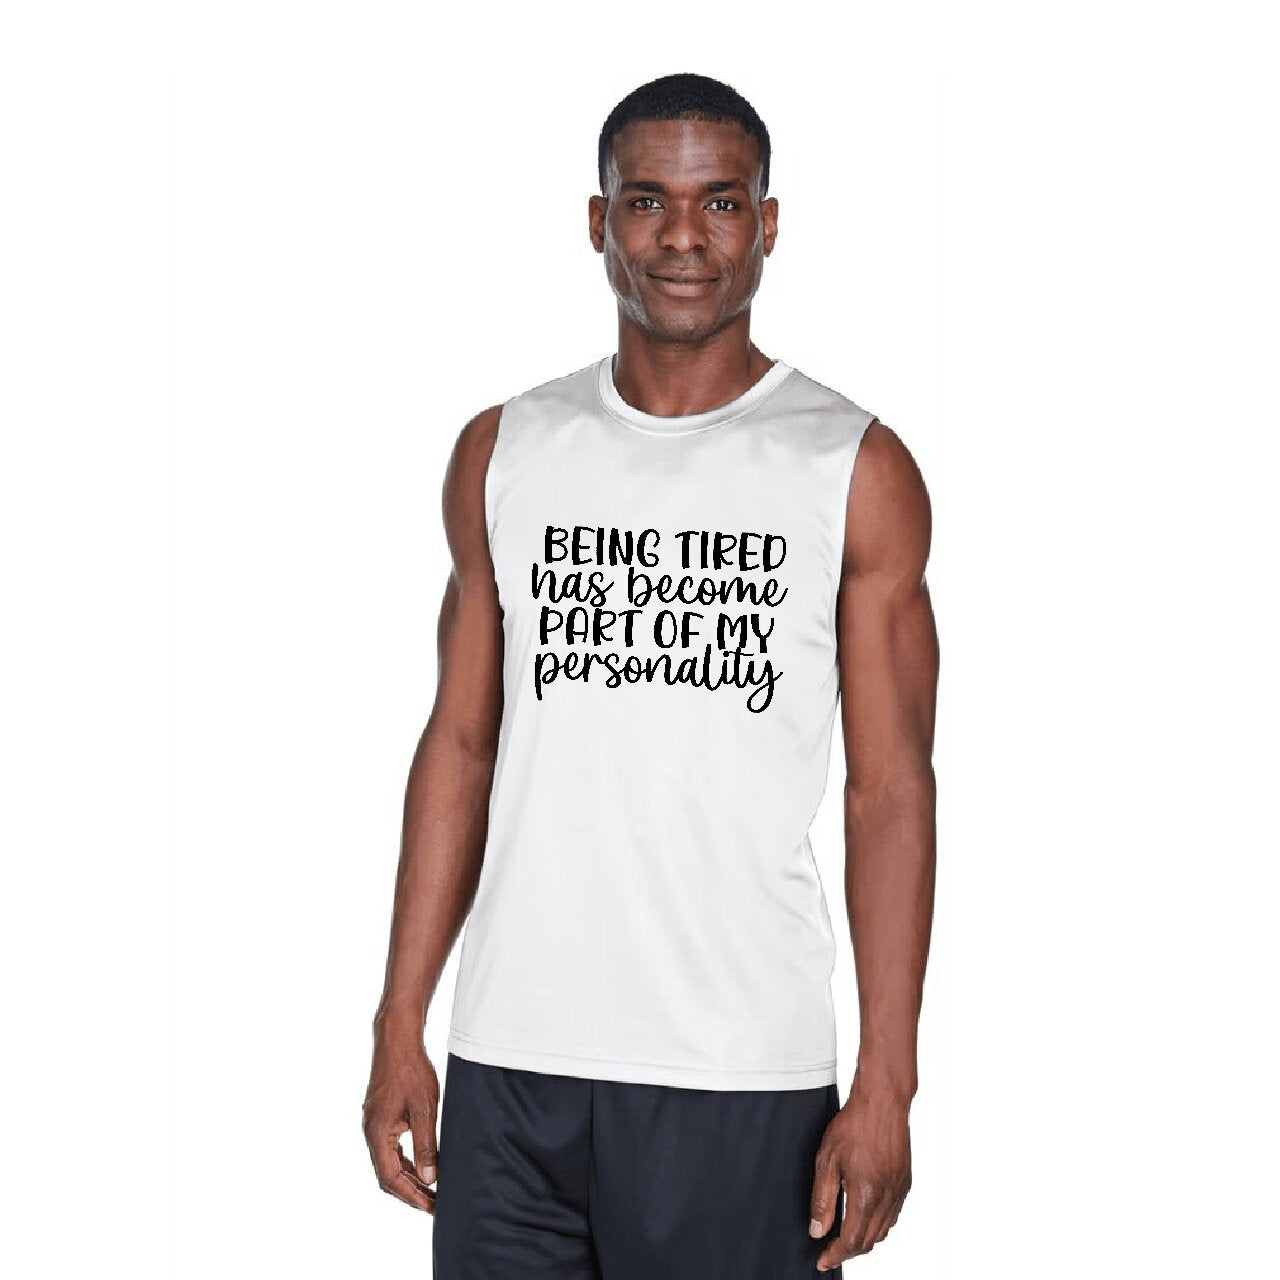 Being Tired Has Become Part Of My Personality - Tank Top